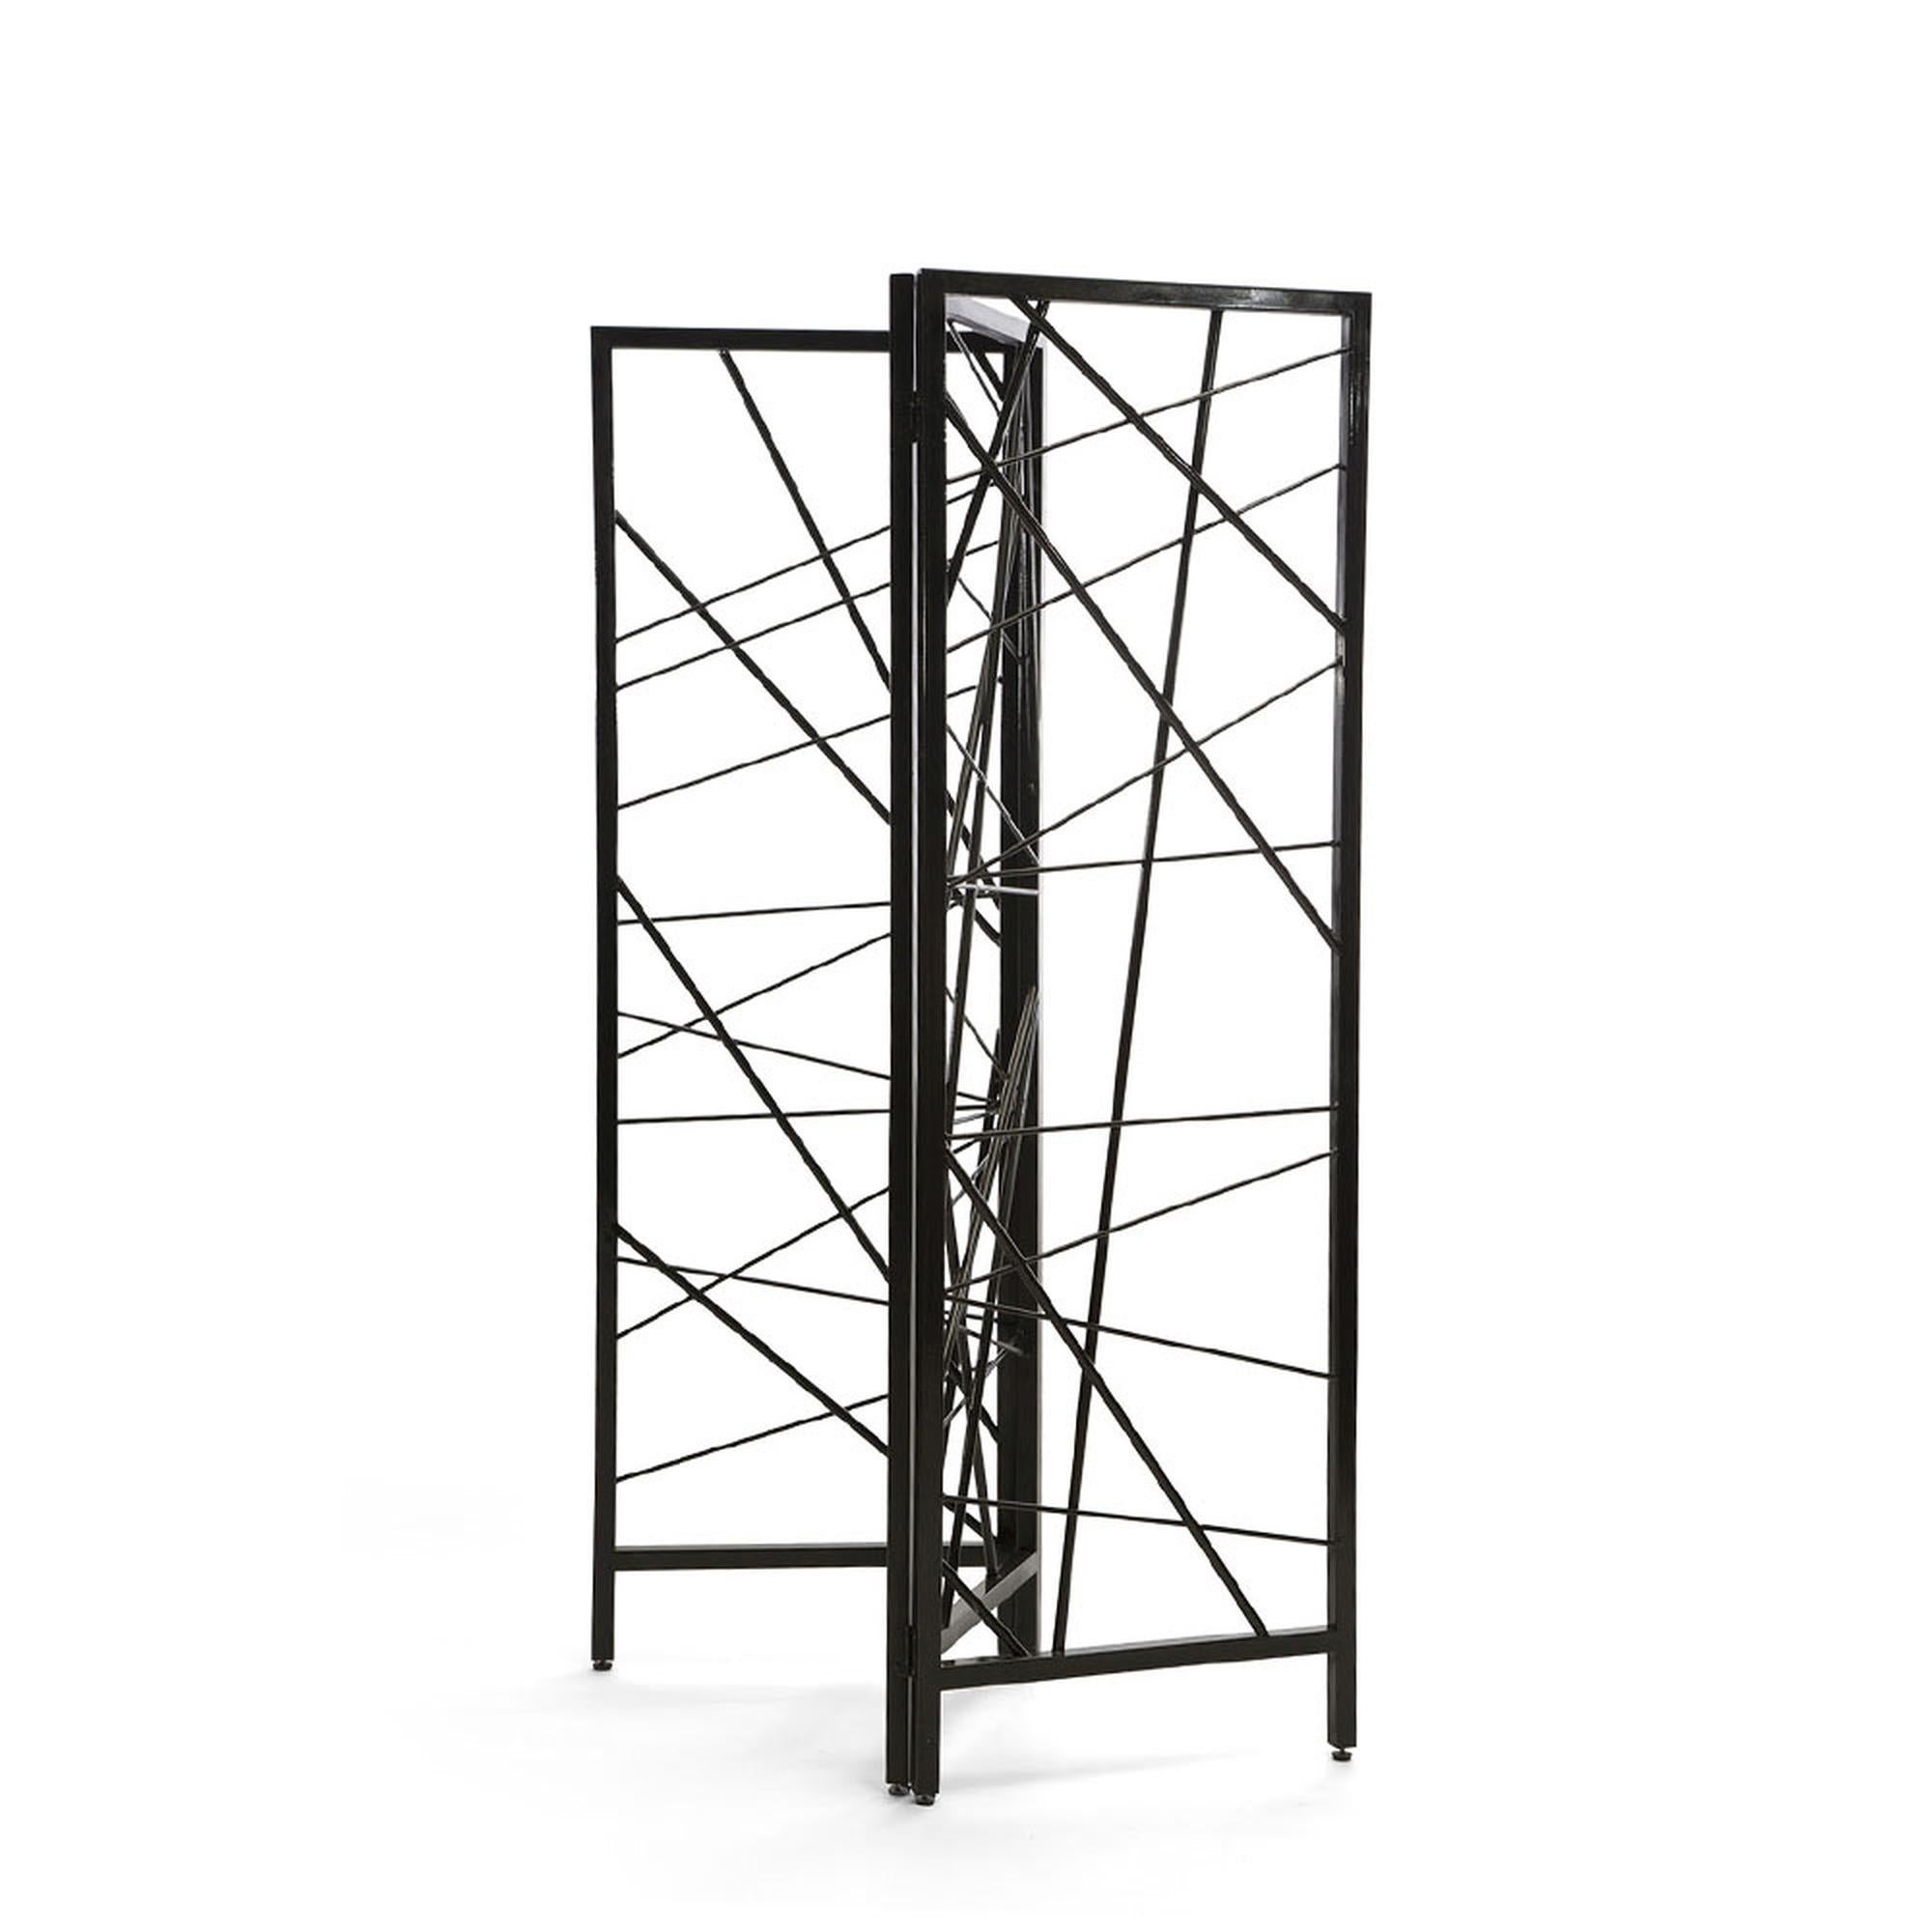 The Doheny room screen delivers a luxurious twist on the classic screen. It features a handcrafted metal frame with a Mikado style design. The sleek metal rods are individually placed and nished with an artisanal approach. Discreet safety locks have